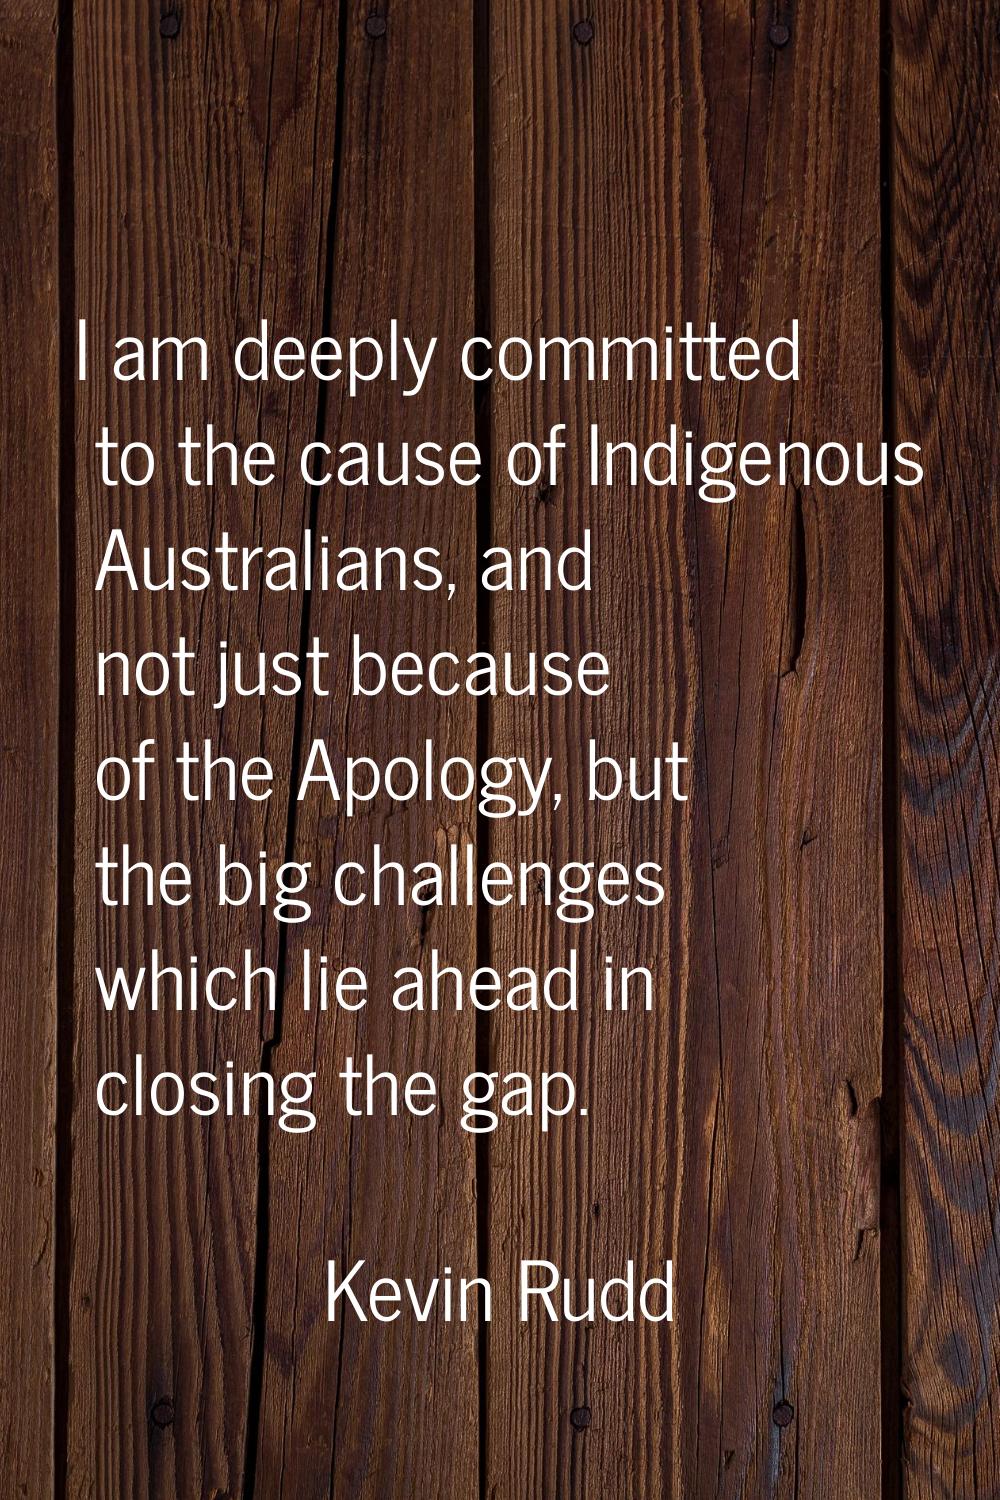 I am deeply committed to the cause of Indigenous Australians, and not just because of the Apology, 